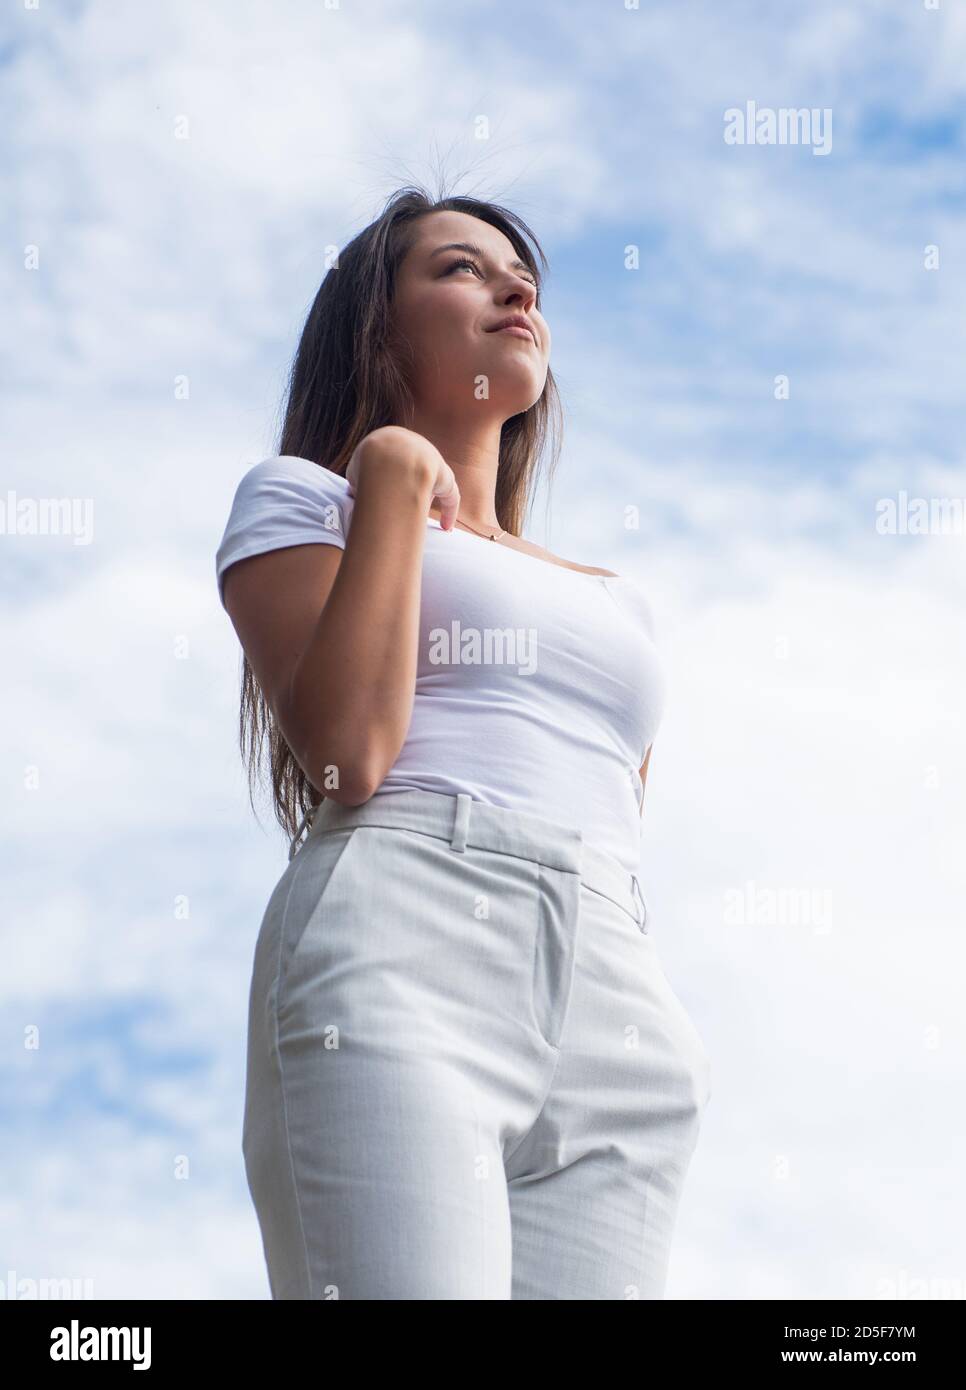 She is really cute. female urban casual fashion. happy carefree lady in  spring. beauty and fashion. fashionable woman wear stylish clothes.  confident and beautiful girl with long hair outdoor Stock Photo 